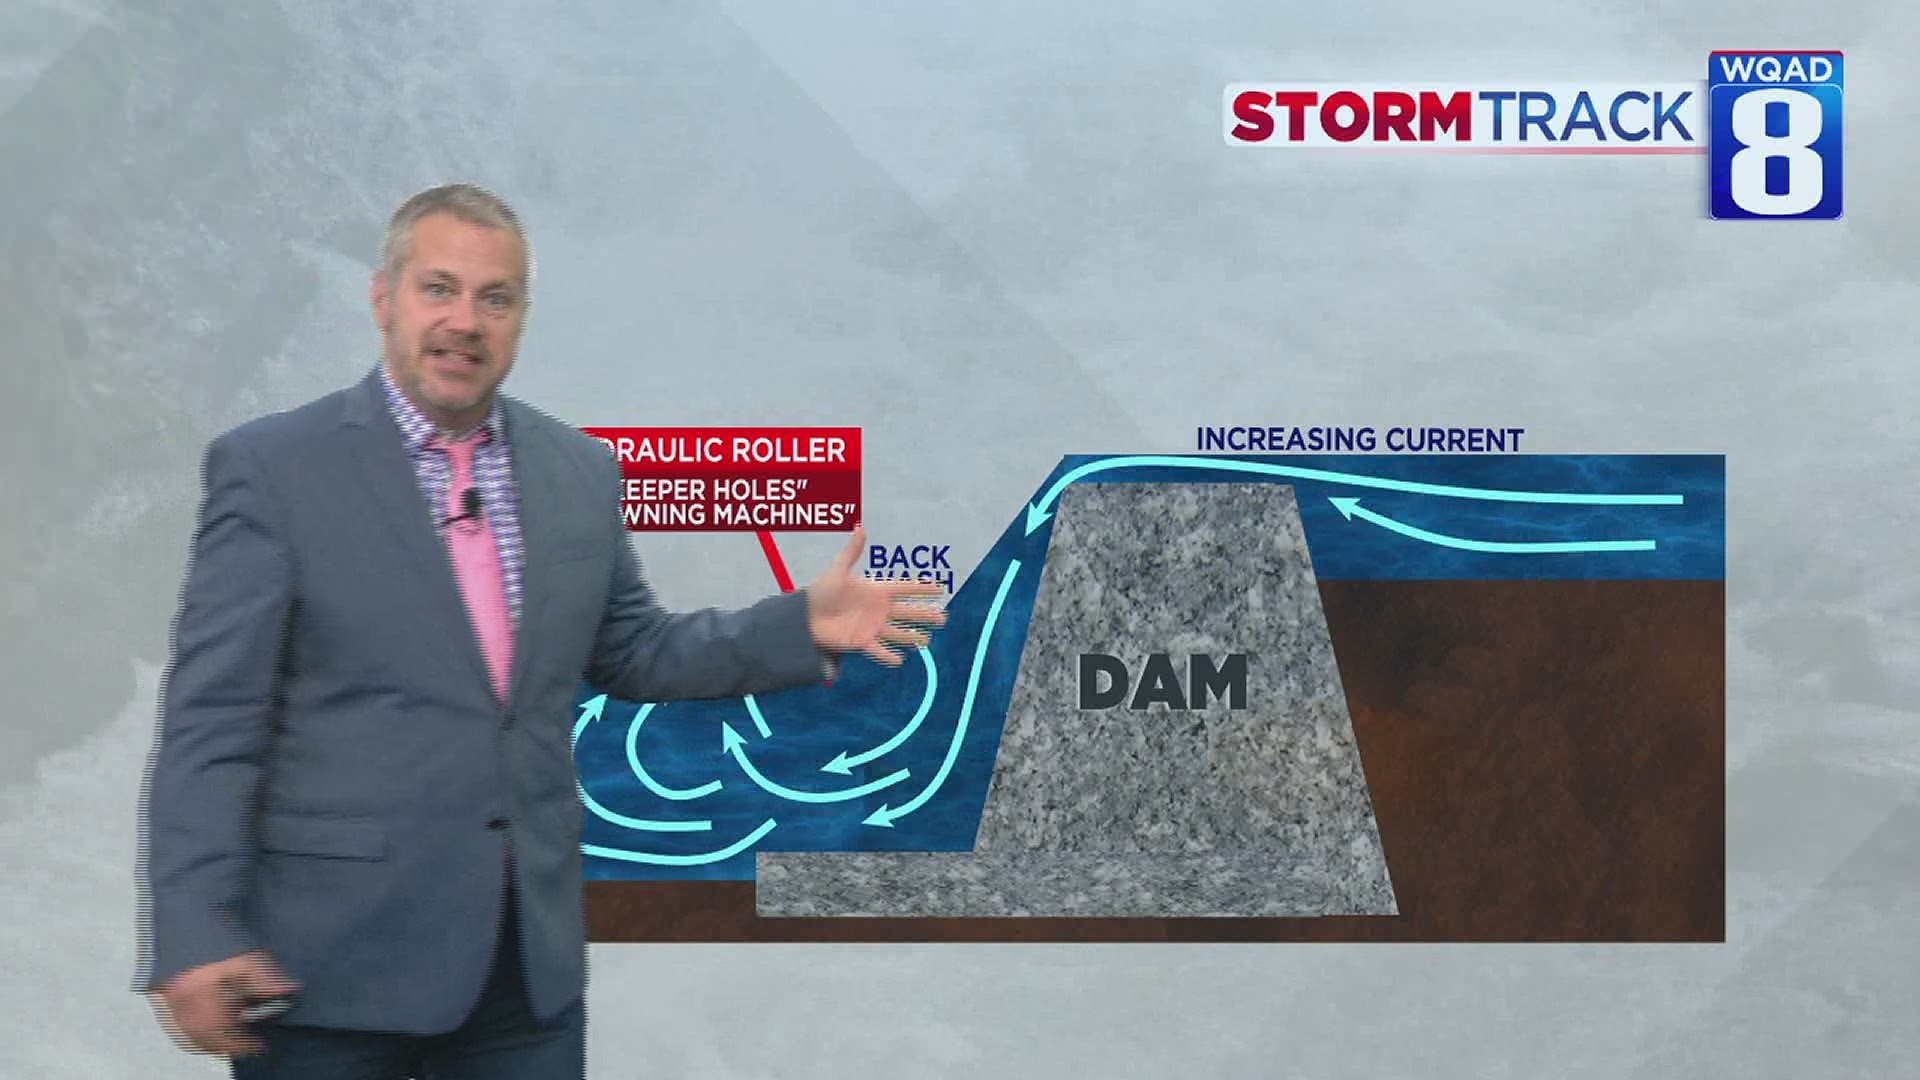 Eric looks at the science of dams and offers a solution to dangerous ones.